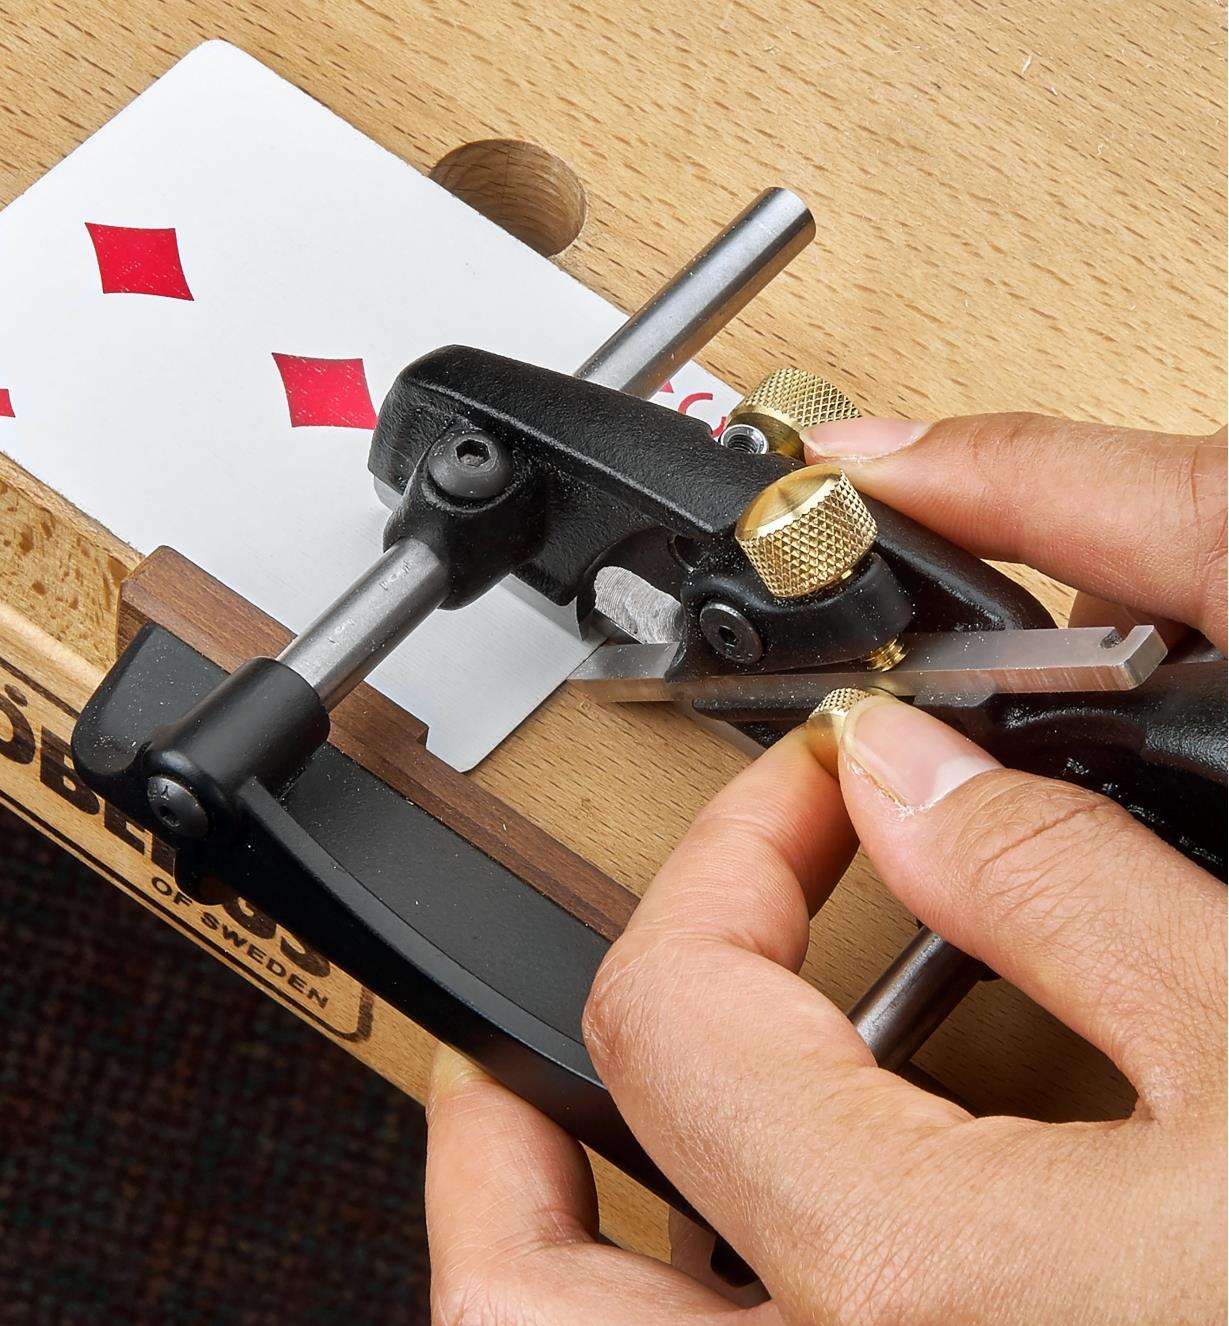 Setting blade projection on a box-maker’s plow plane, using a playing card as a shim under the skate